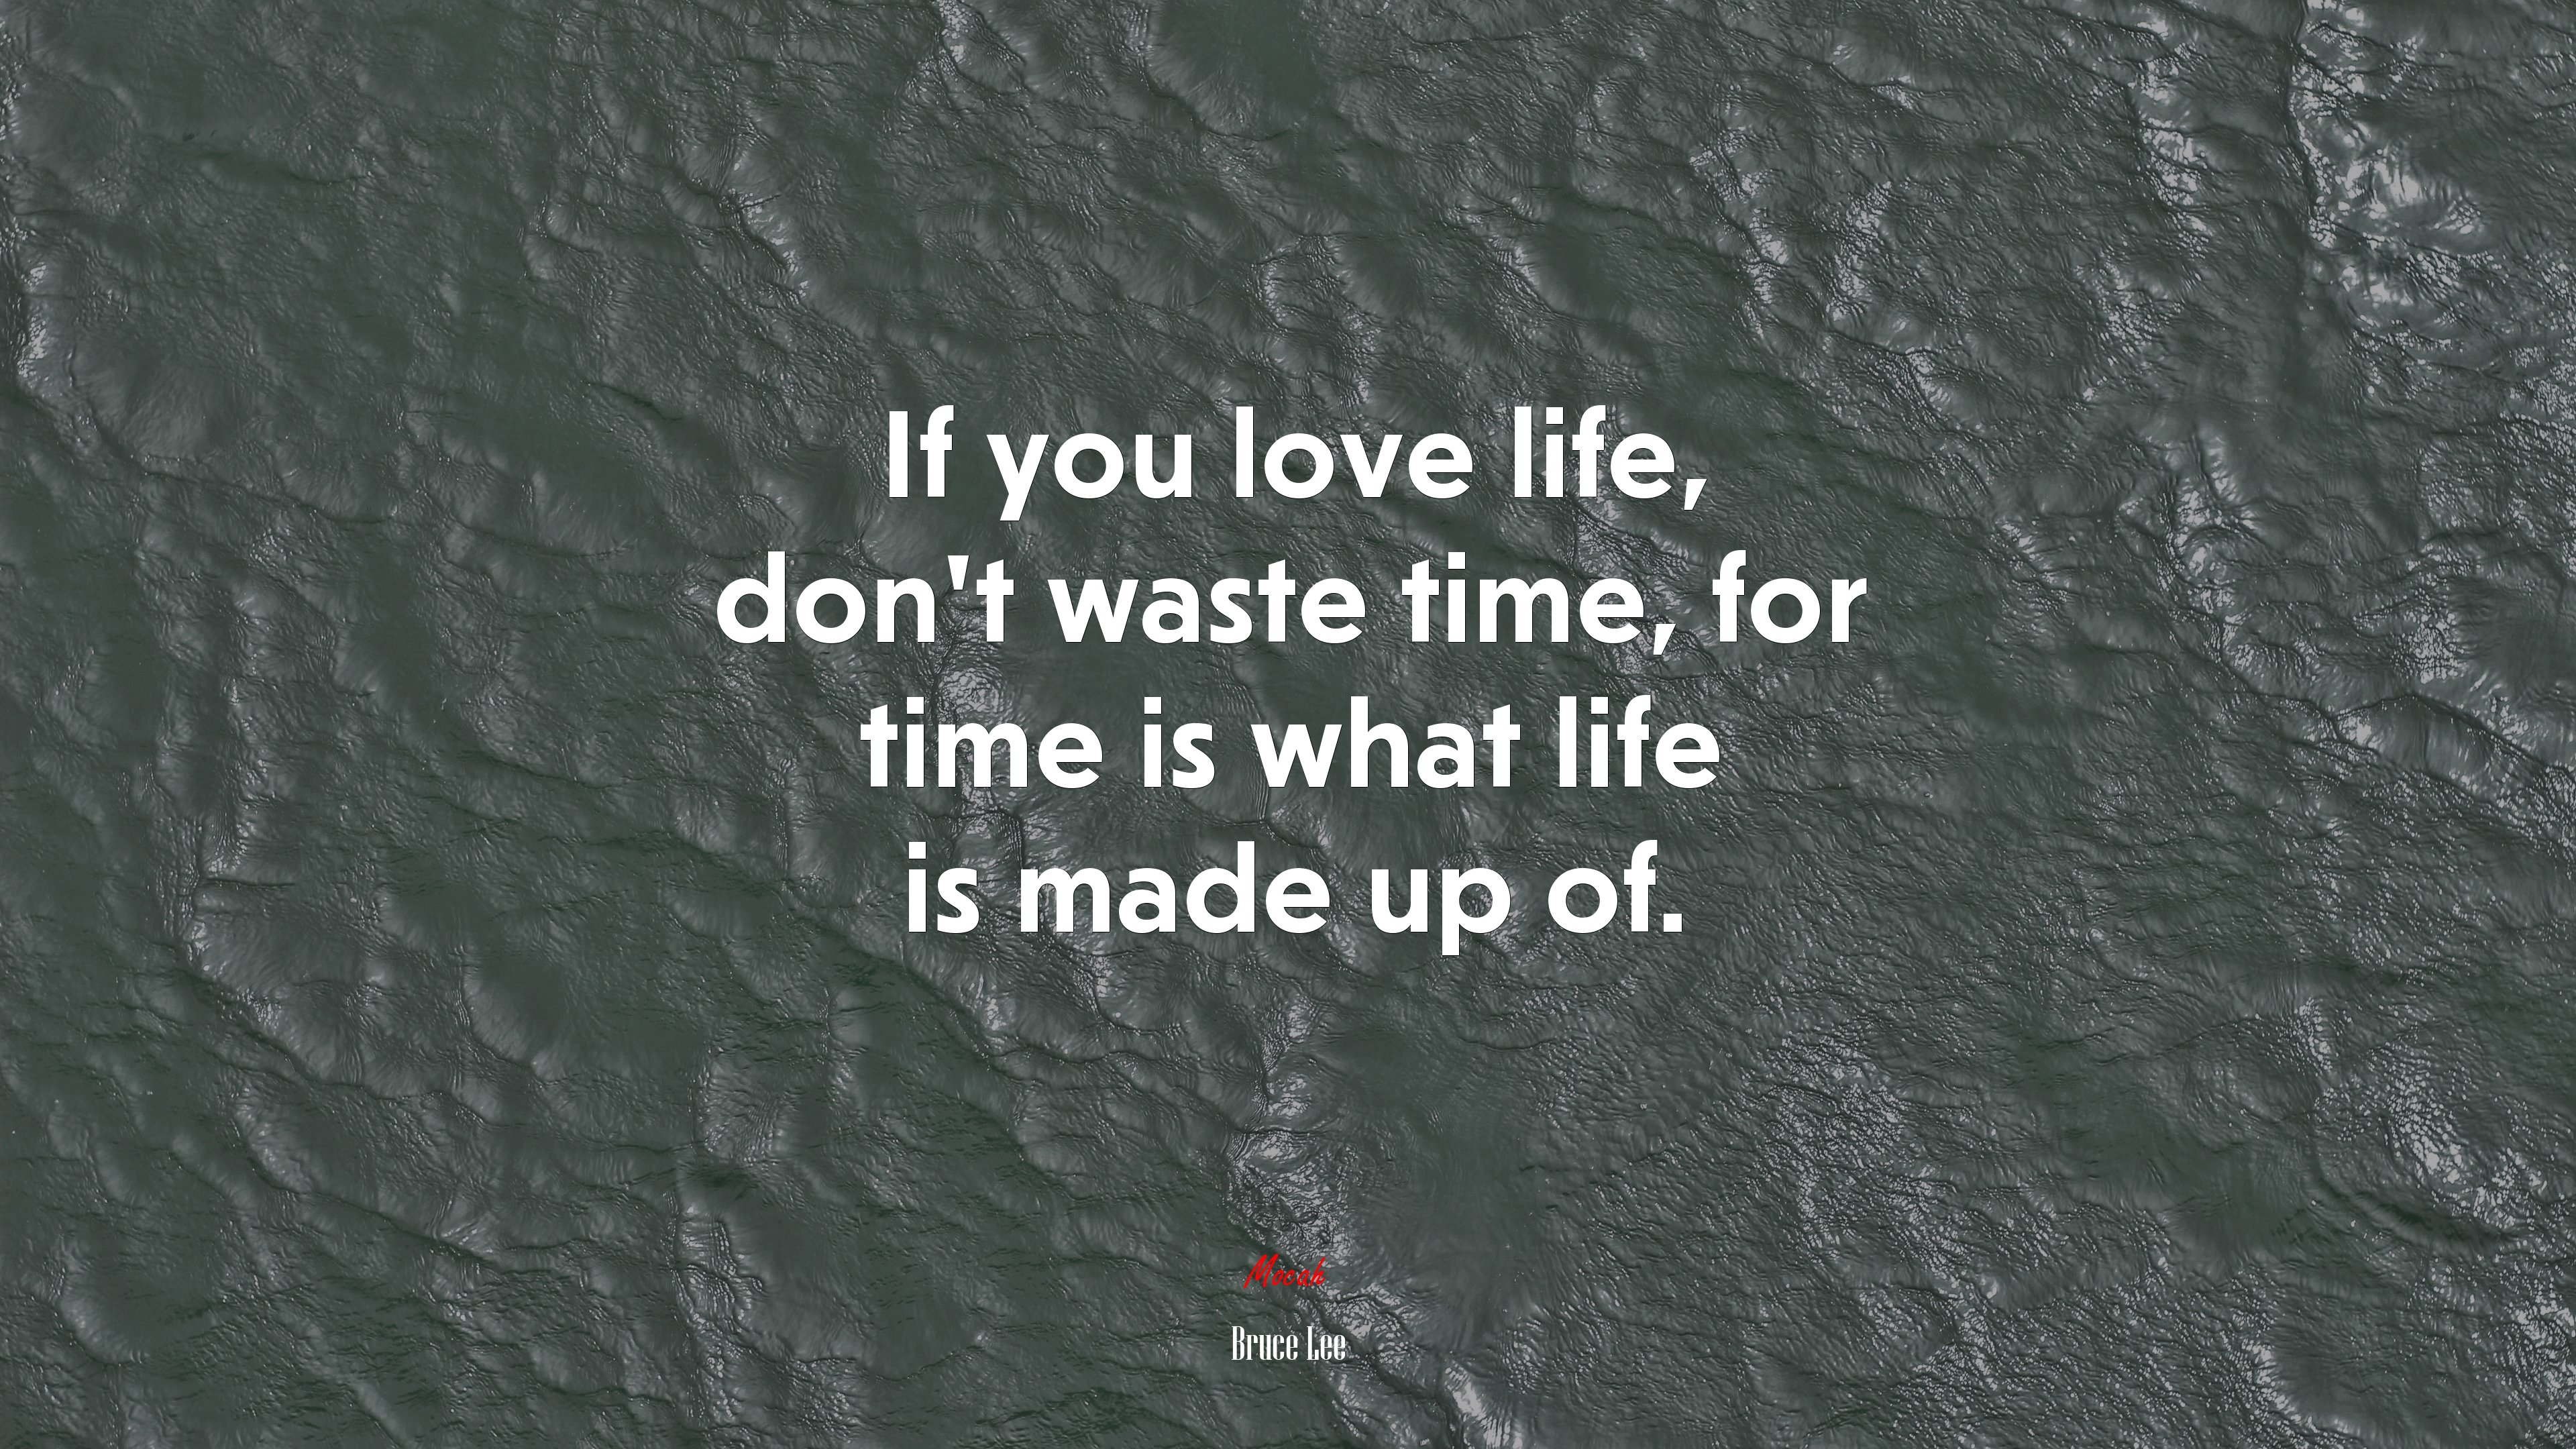 If you love life, don't waste time, for time is what life is made up of. Bruce Lee quote Gallery HD Wallpaper